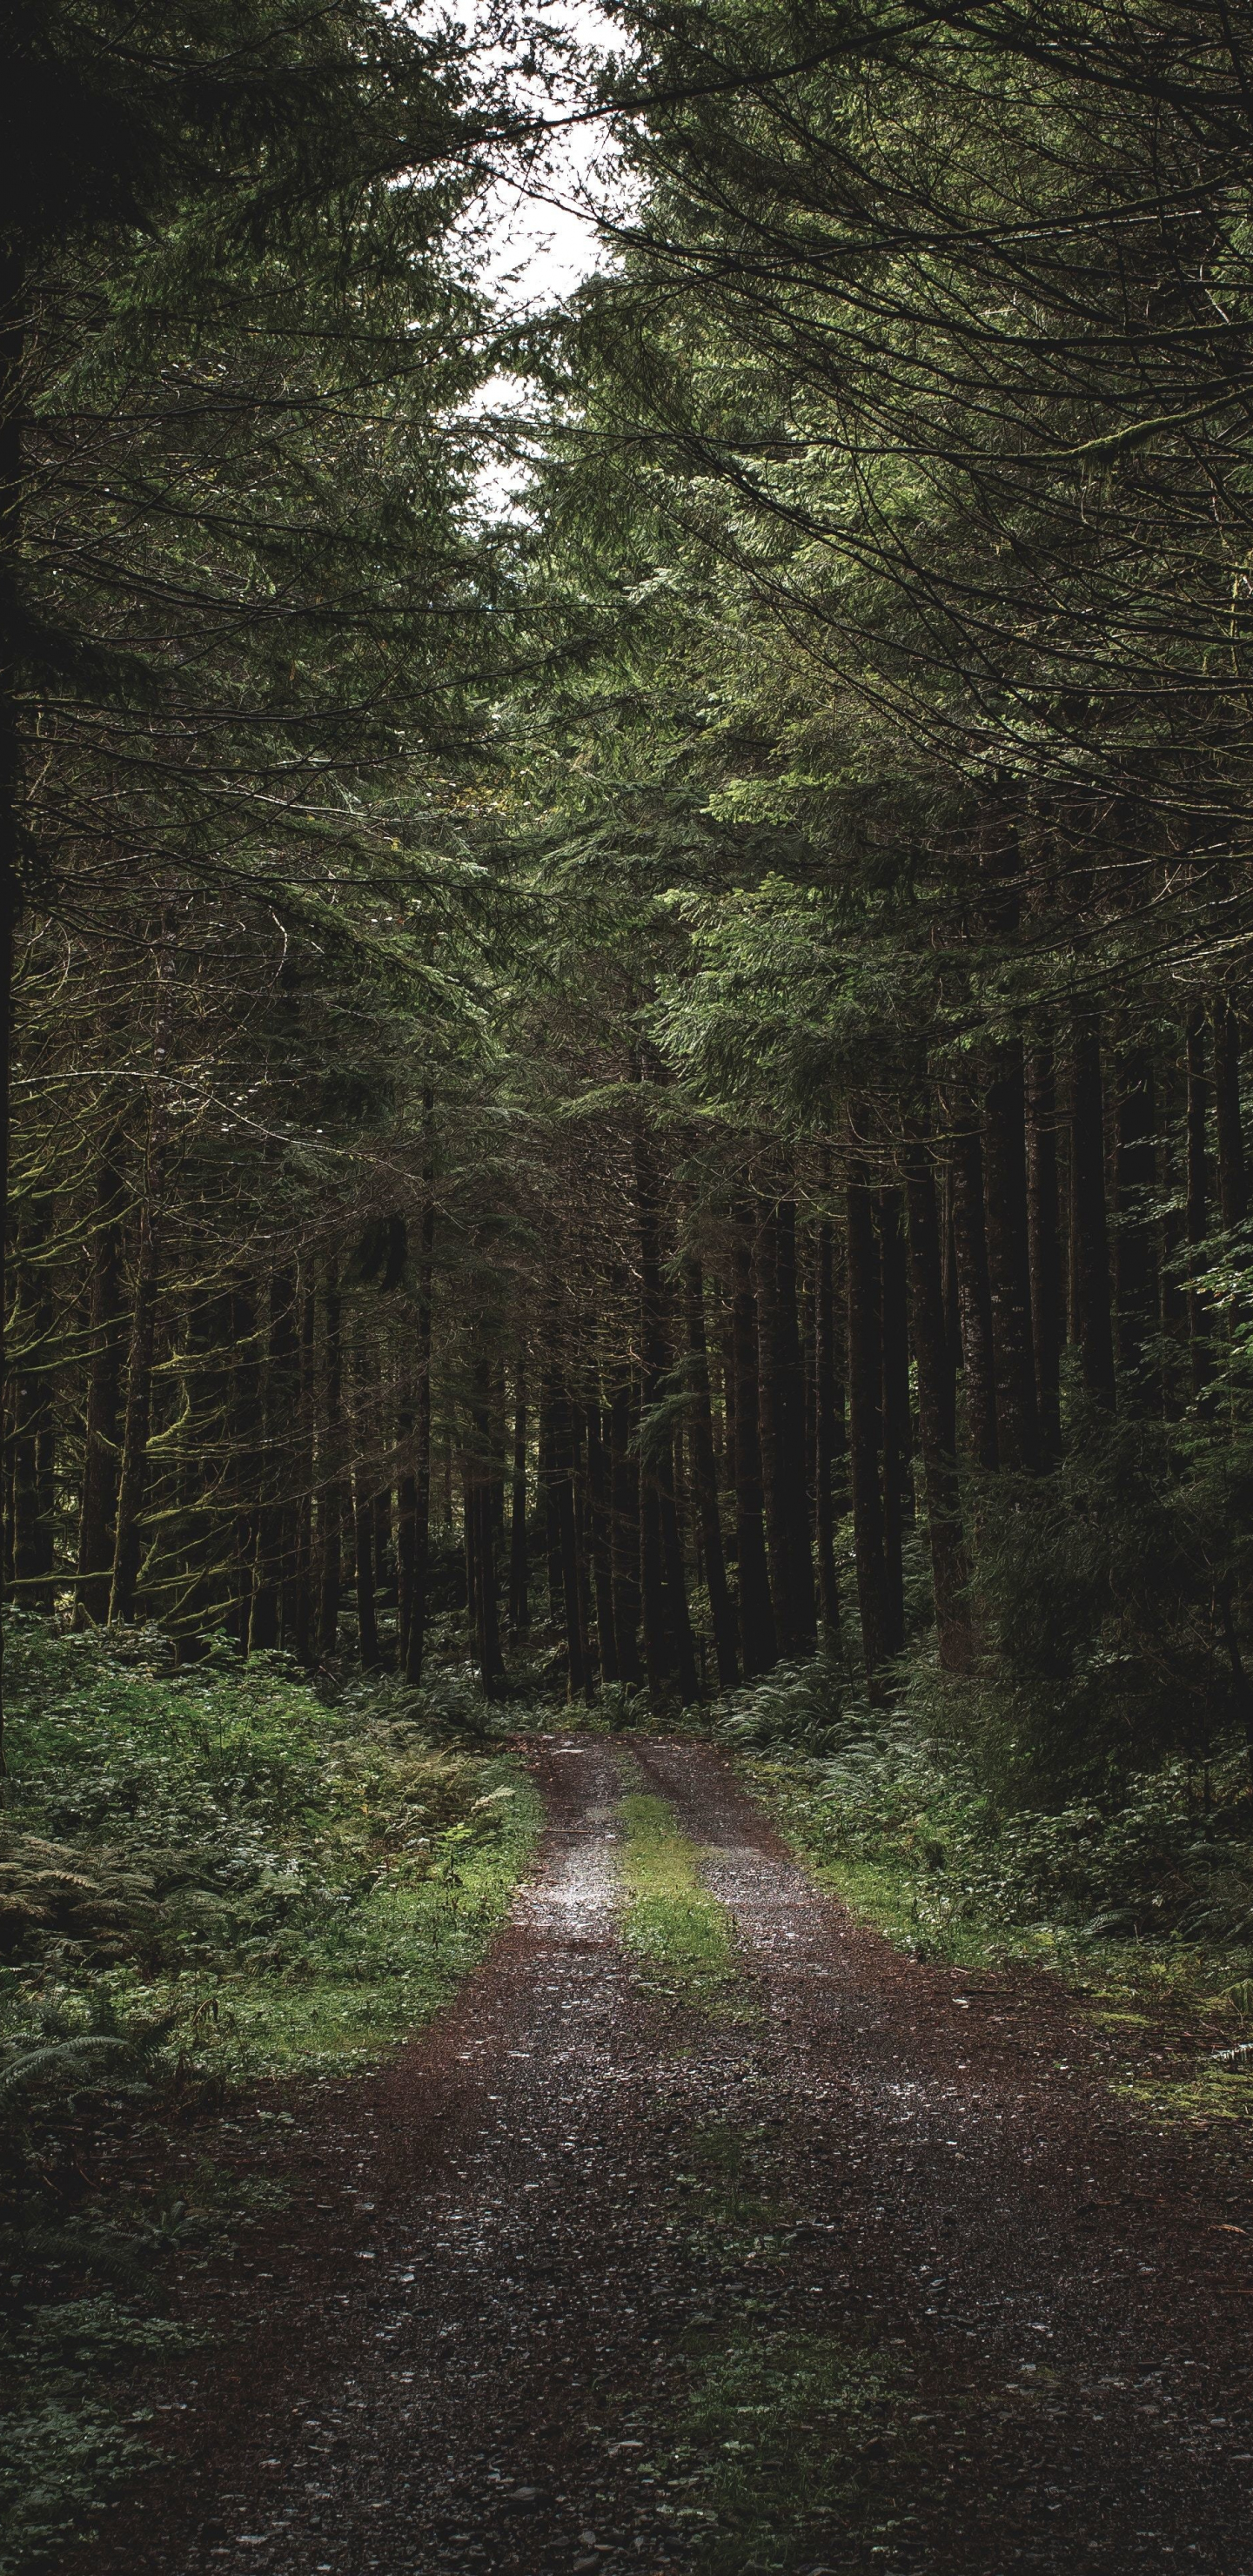 Dirt road, path, trees, forest, greenery, 1440x2960 wallpaper